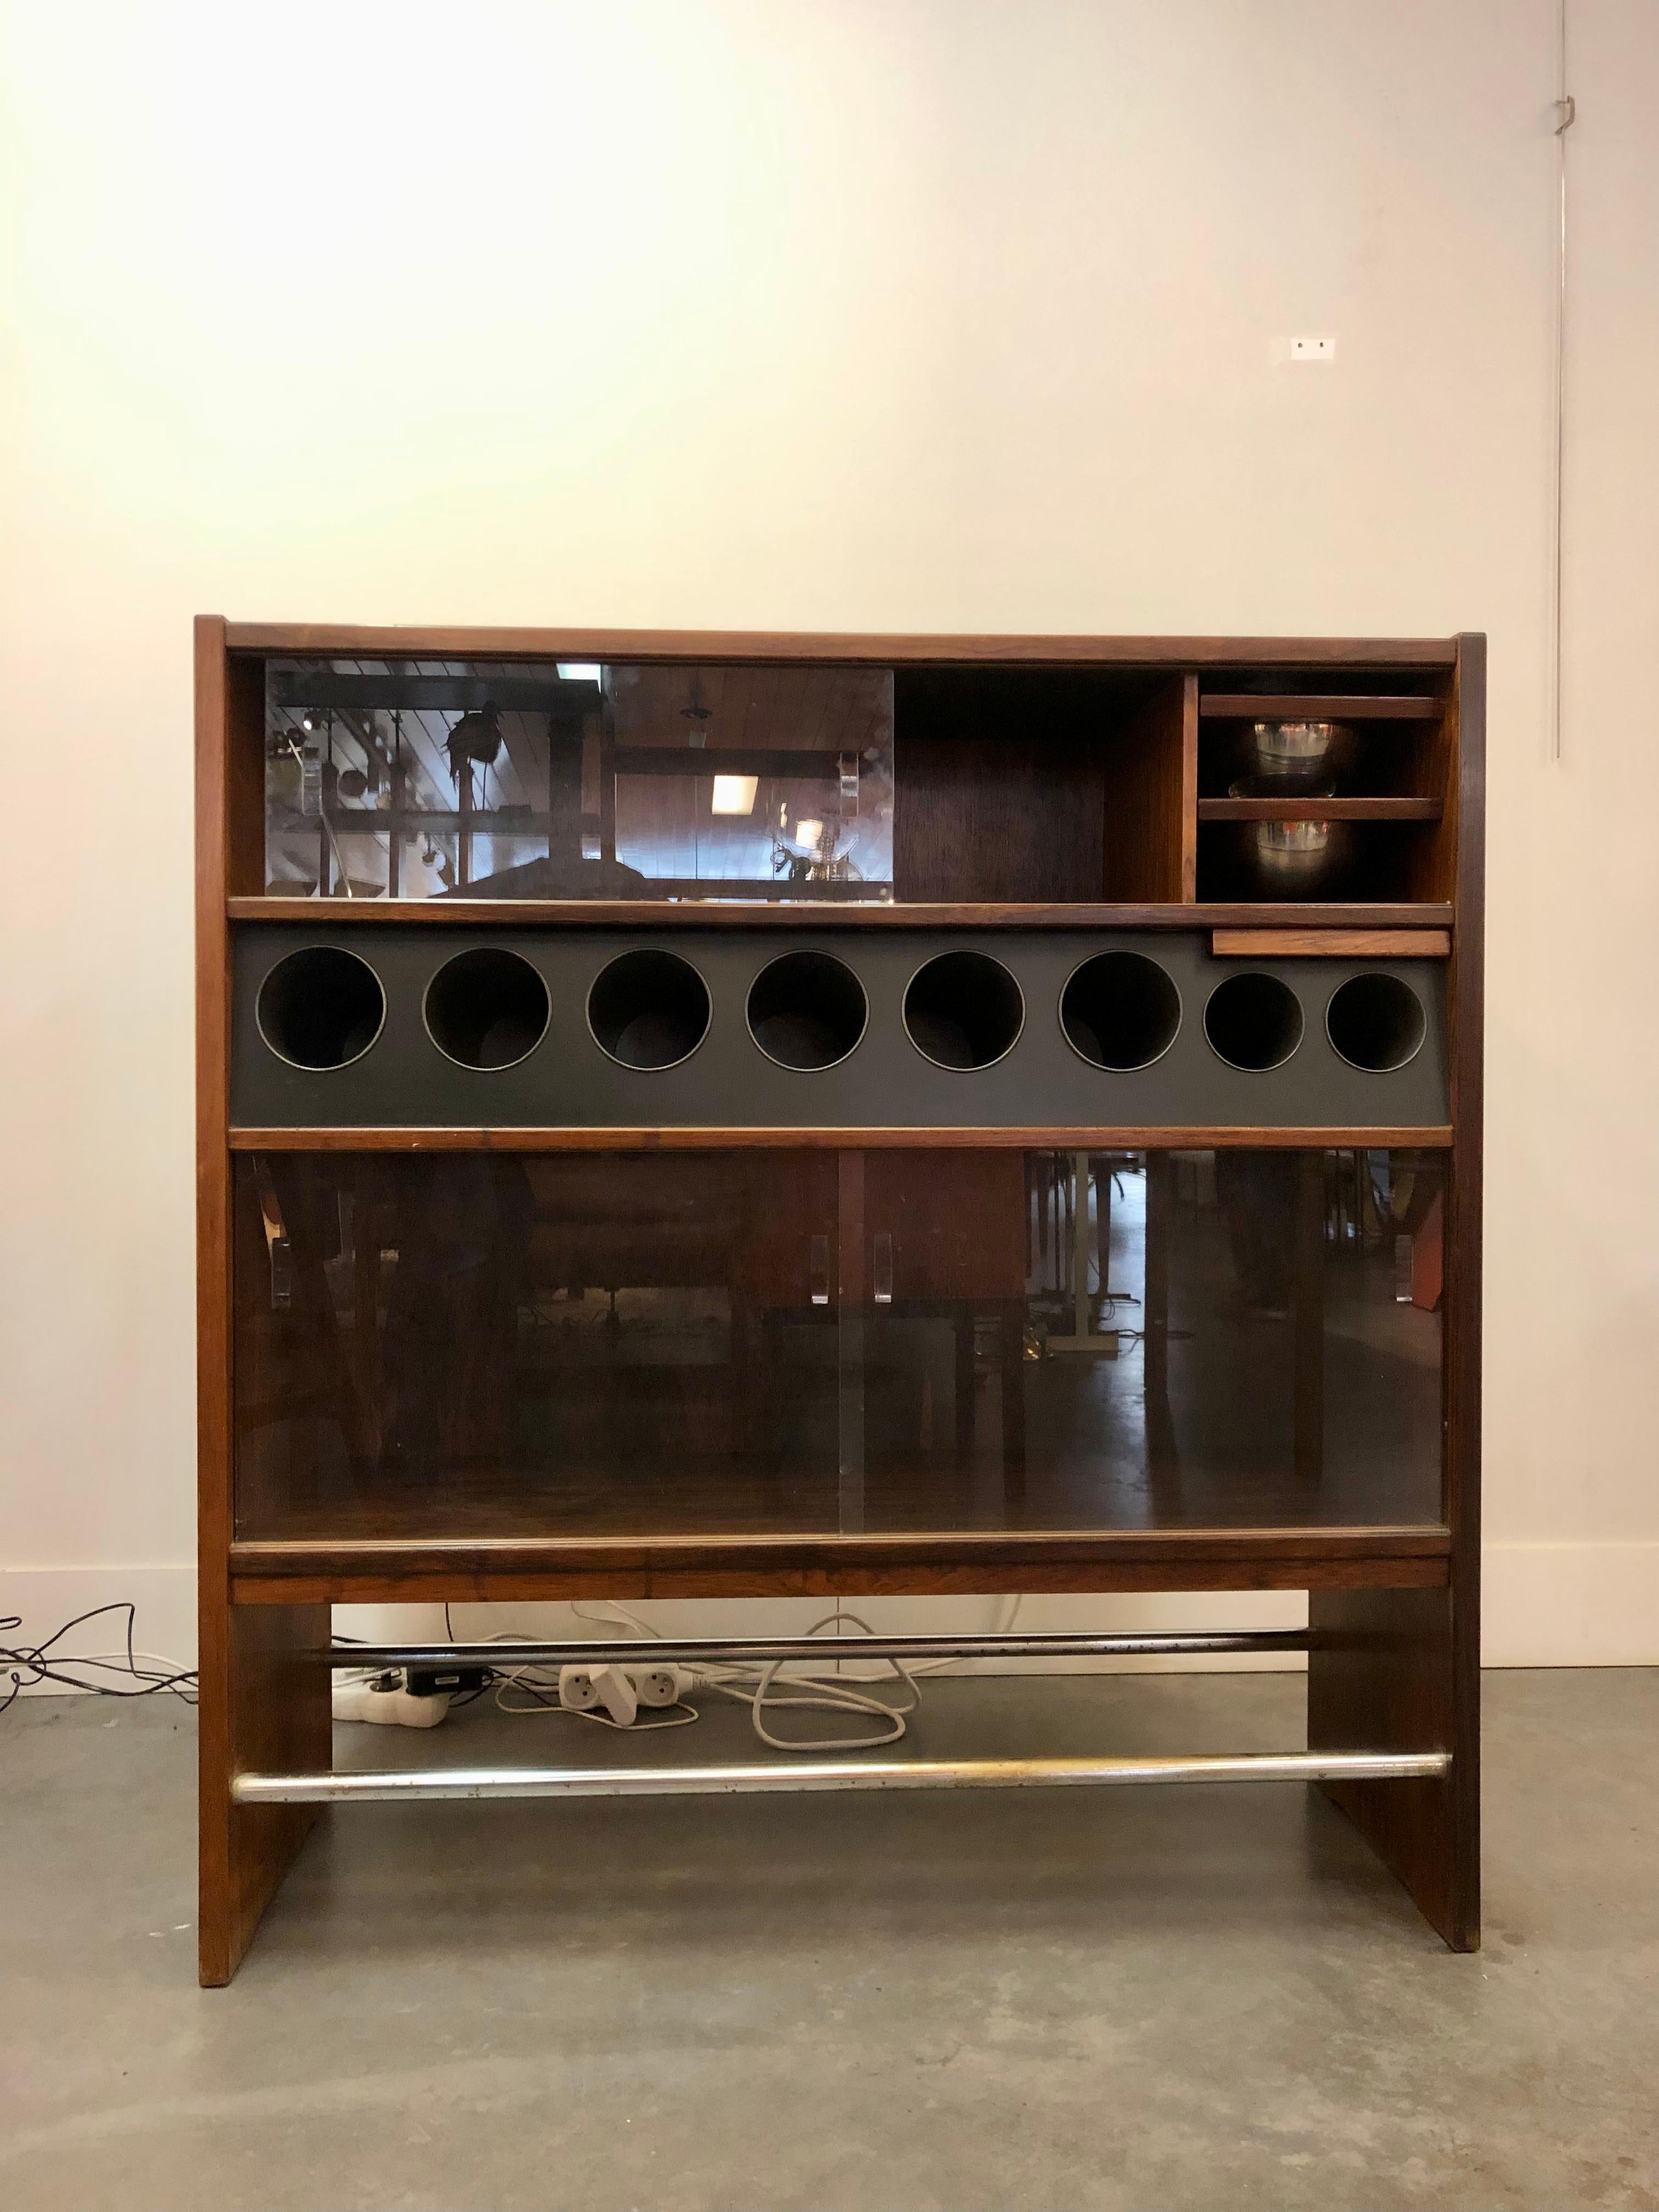 Dry Bar around 1960 by Erik Buch in rosewood by danish cabinet maker’s Heltborg möbler.
Some impressed marks on the leather top of the bar (see pictures).